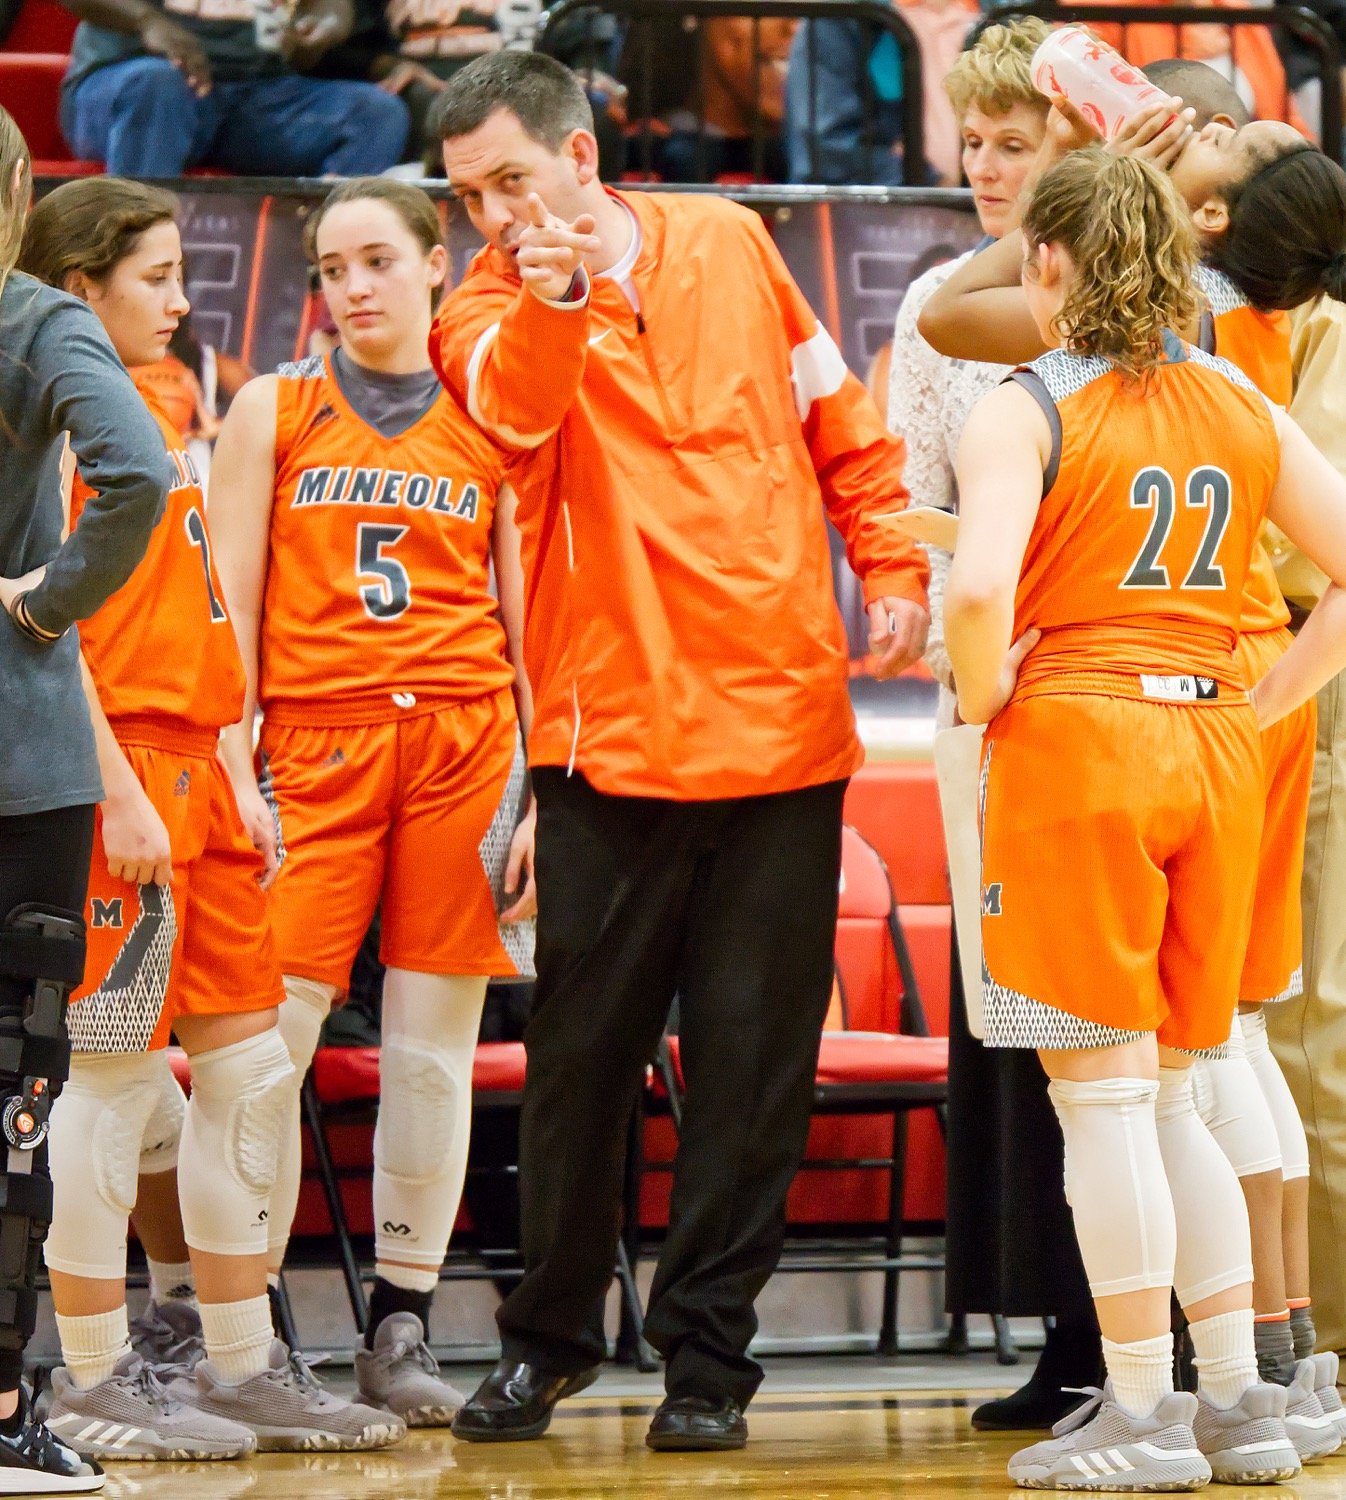 Coach Brad Gibson makes a point to the huddled Ladyjackets during a timeout.